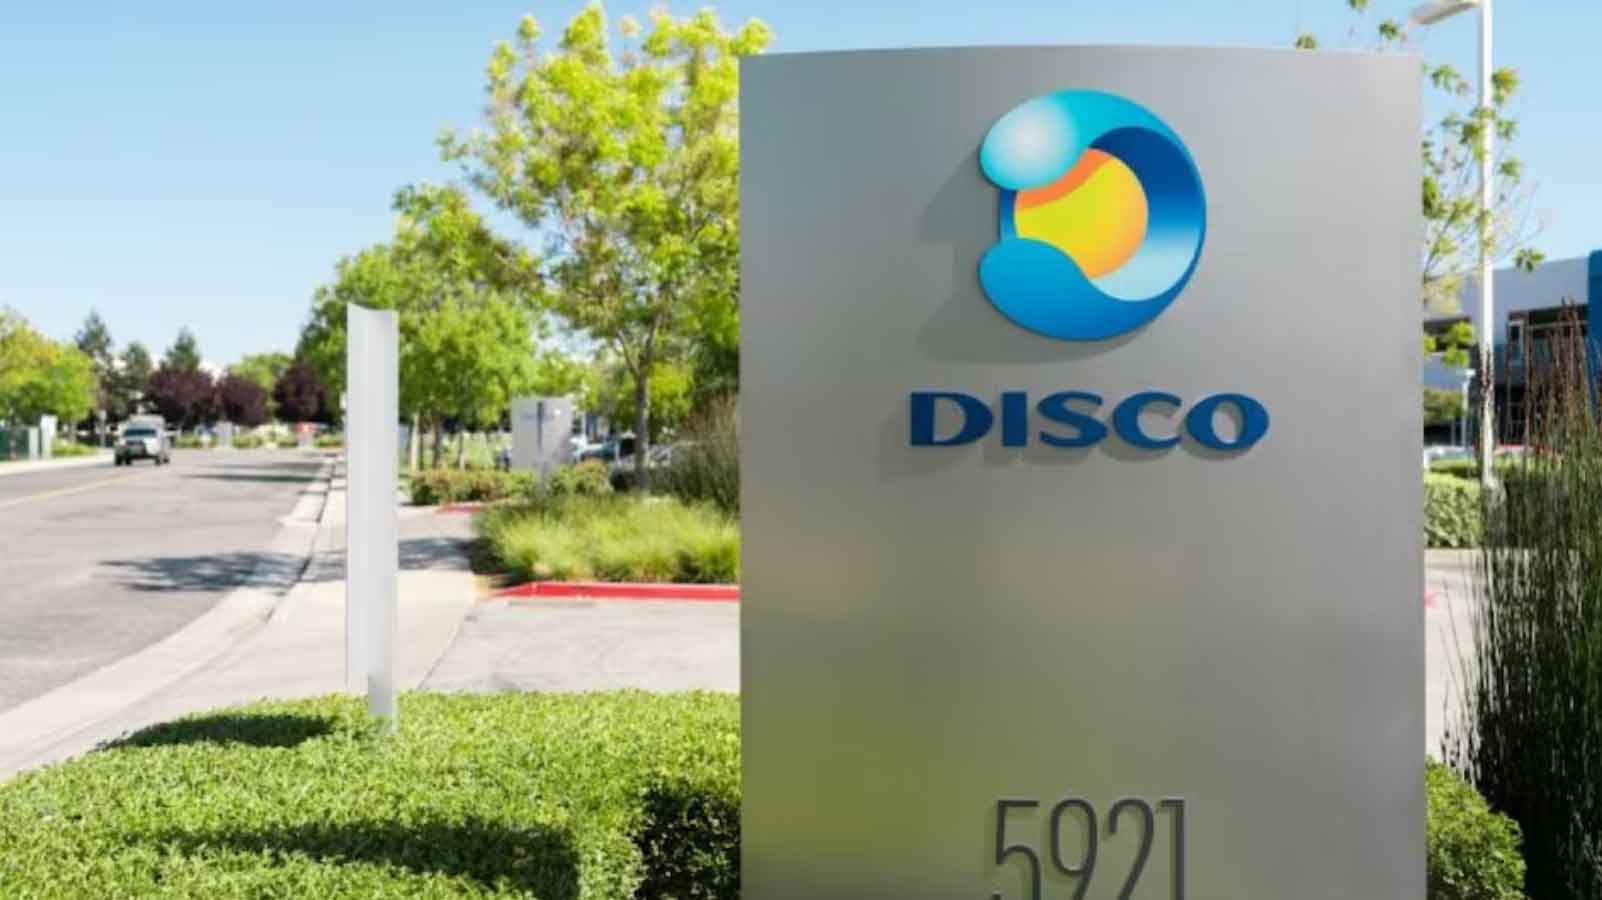 Japanese company Disco mulls to set up centre in India to generate over 5000 jobs